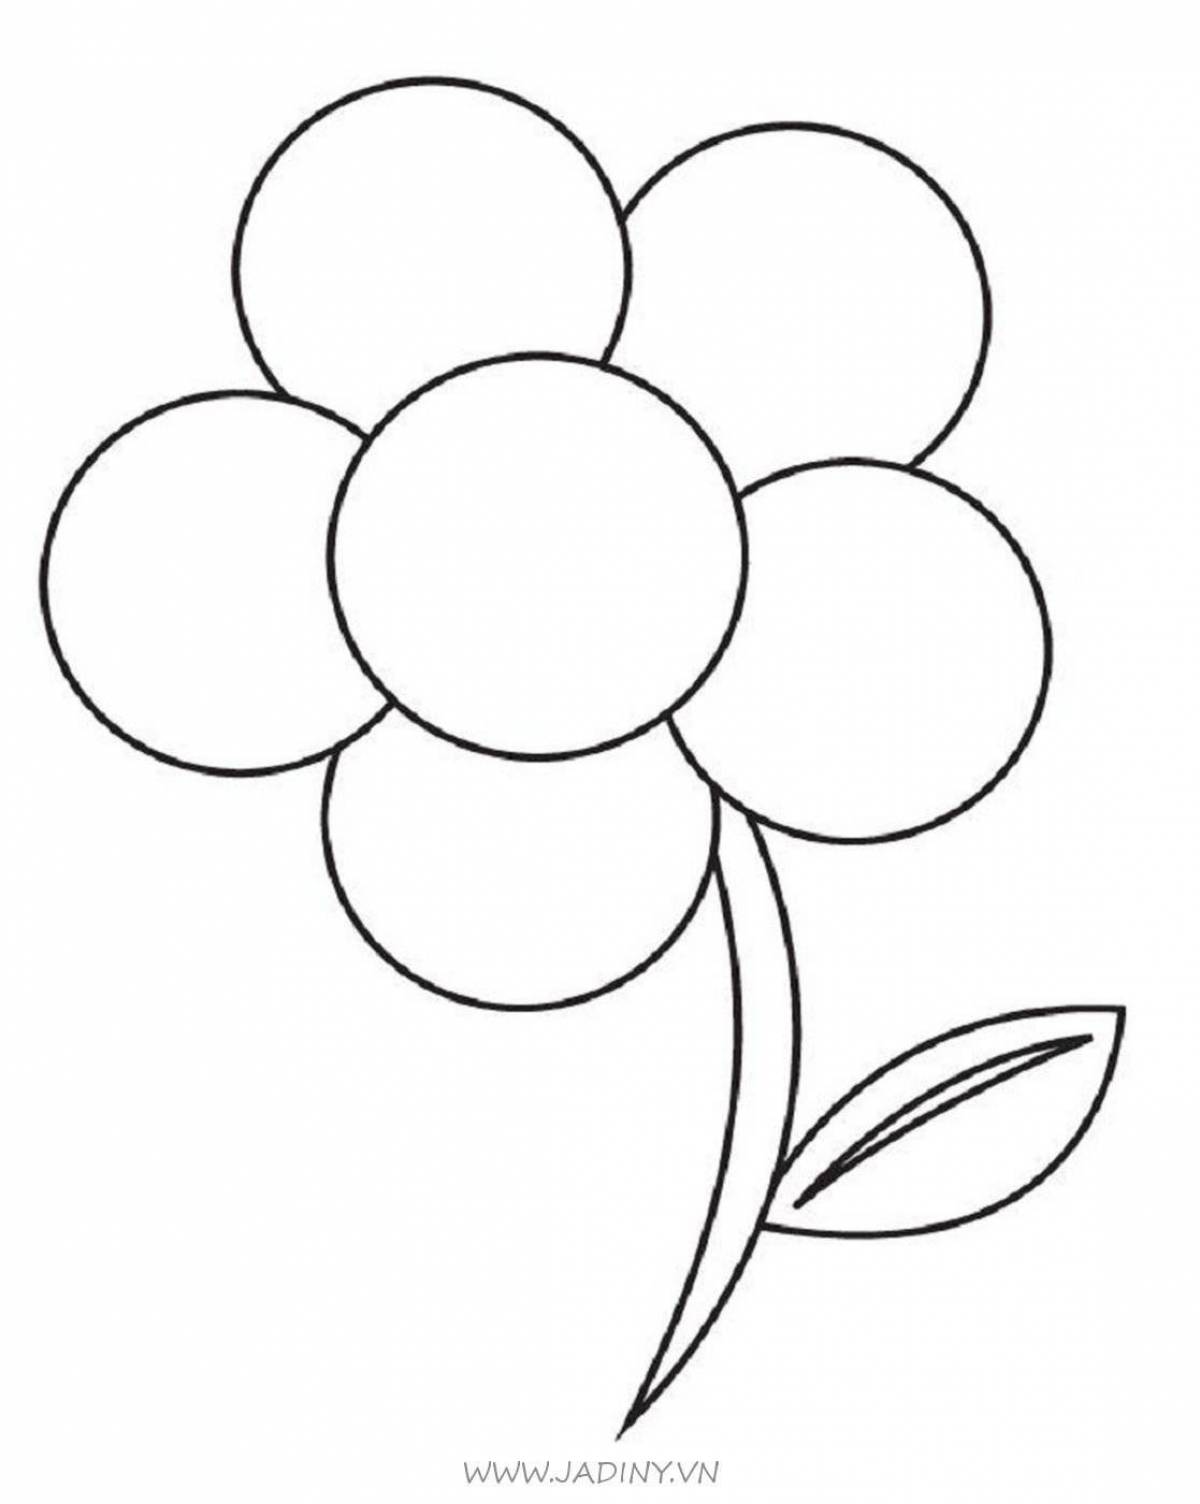 Amazing flower coloring pages for 4-5 year olds